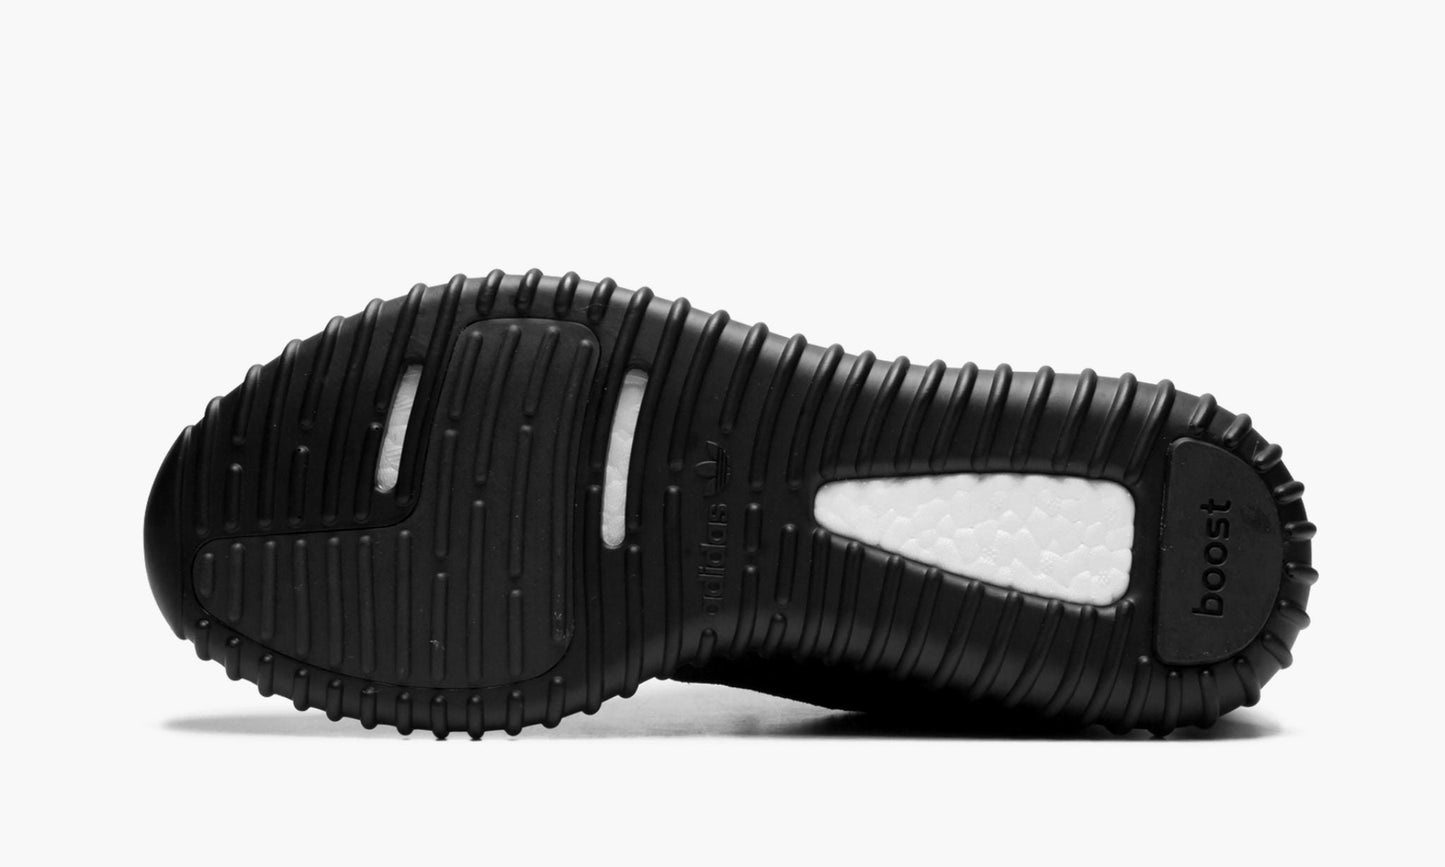 Yeezy Boost 350 "Pirate Black - 2016 Release"